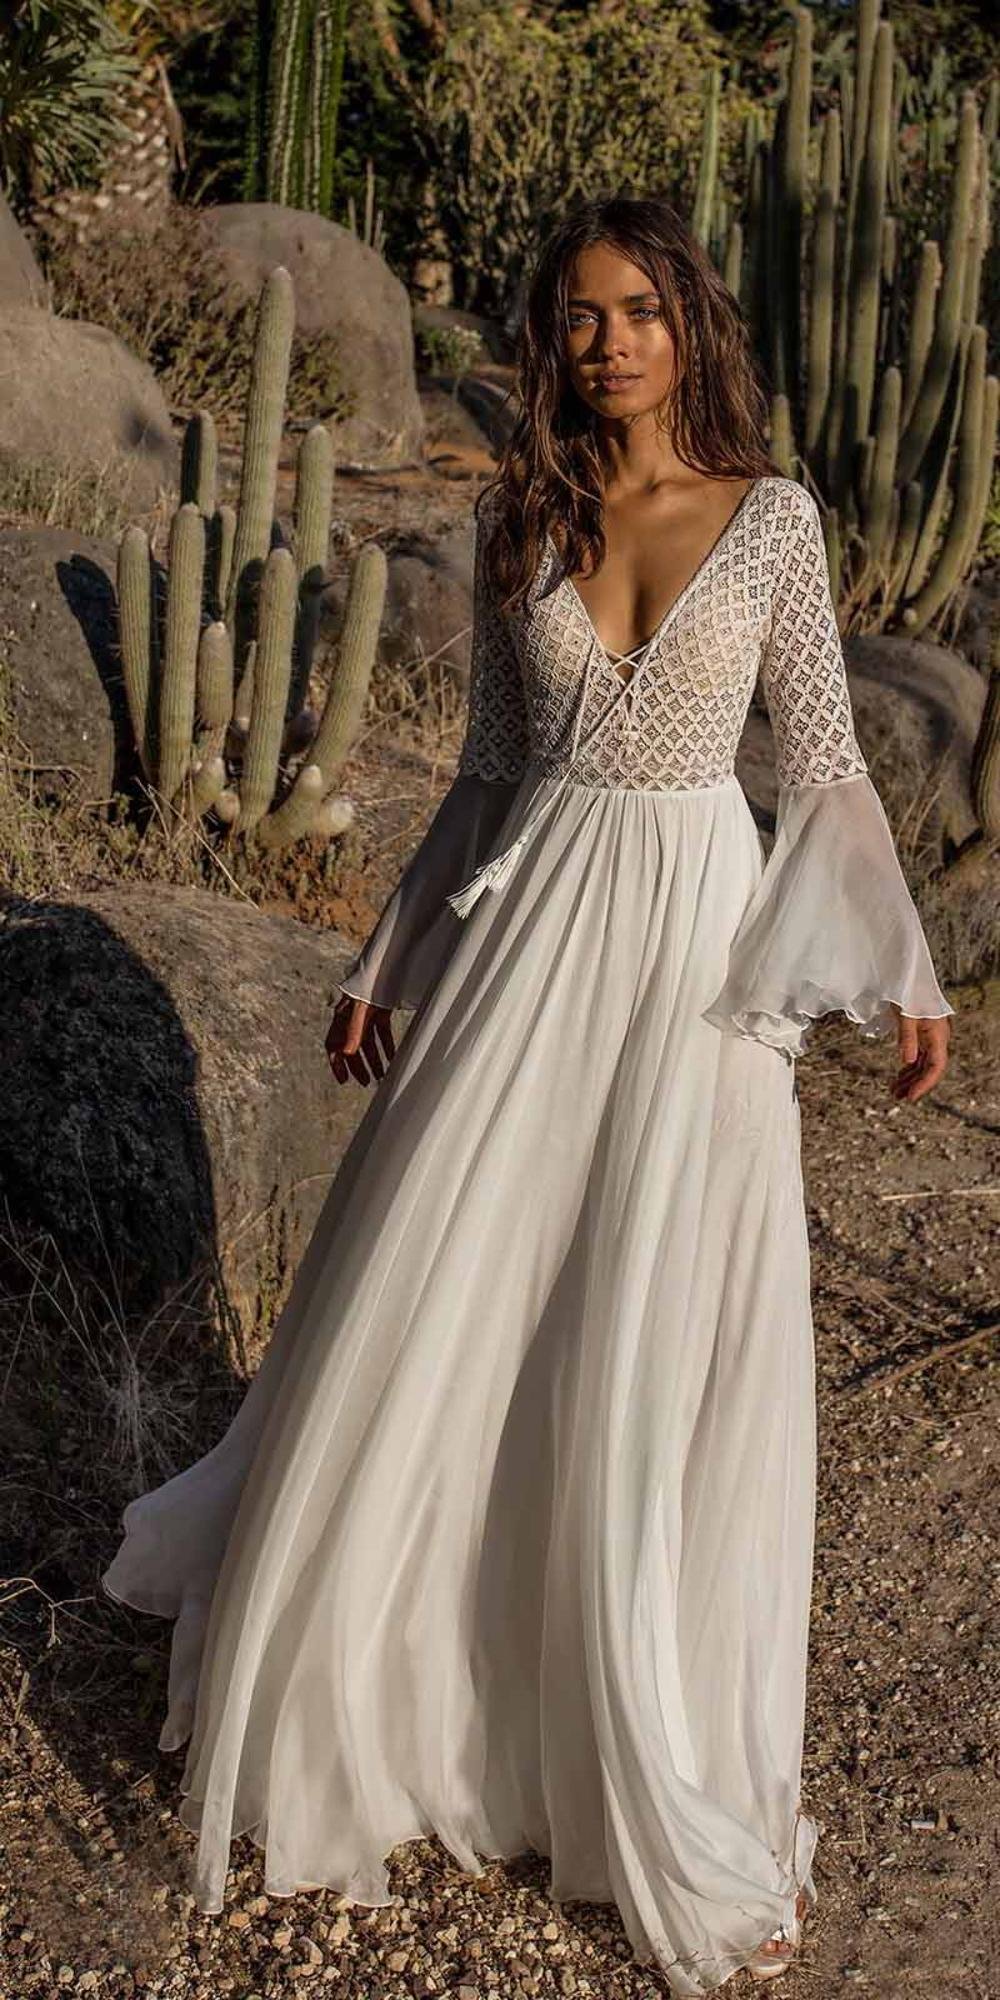 Fitshinling Backless lace long dress autumn 2020 v neck sexy hot bohemian maxi dresses for women flare sleeve white pareos sale